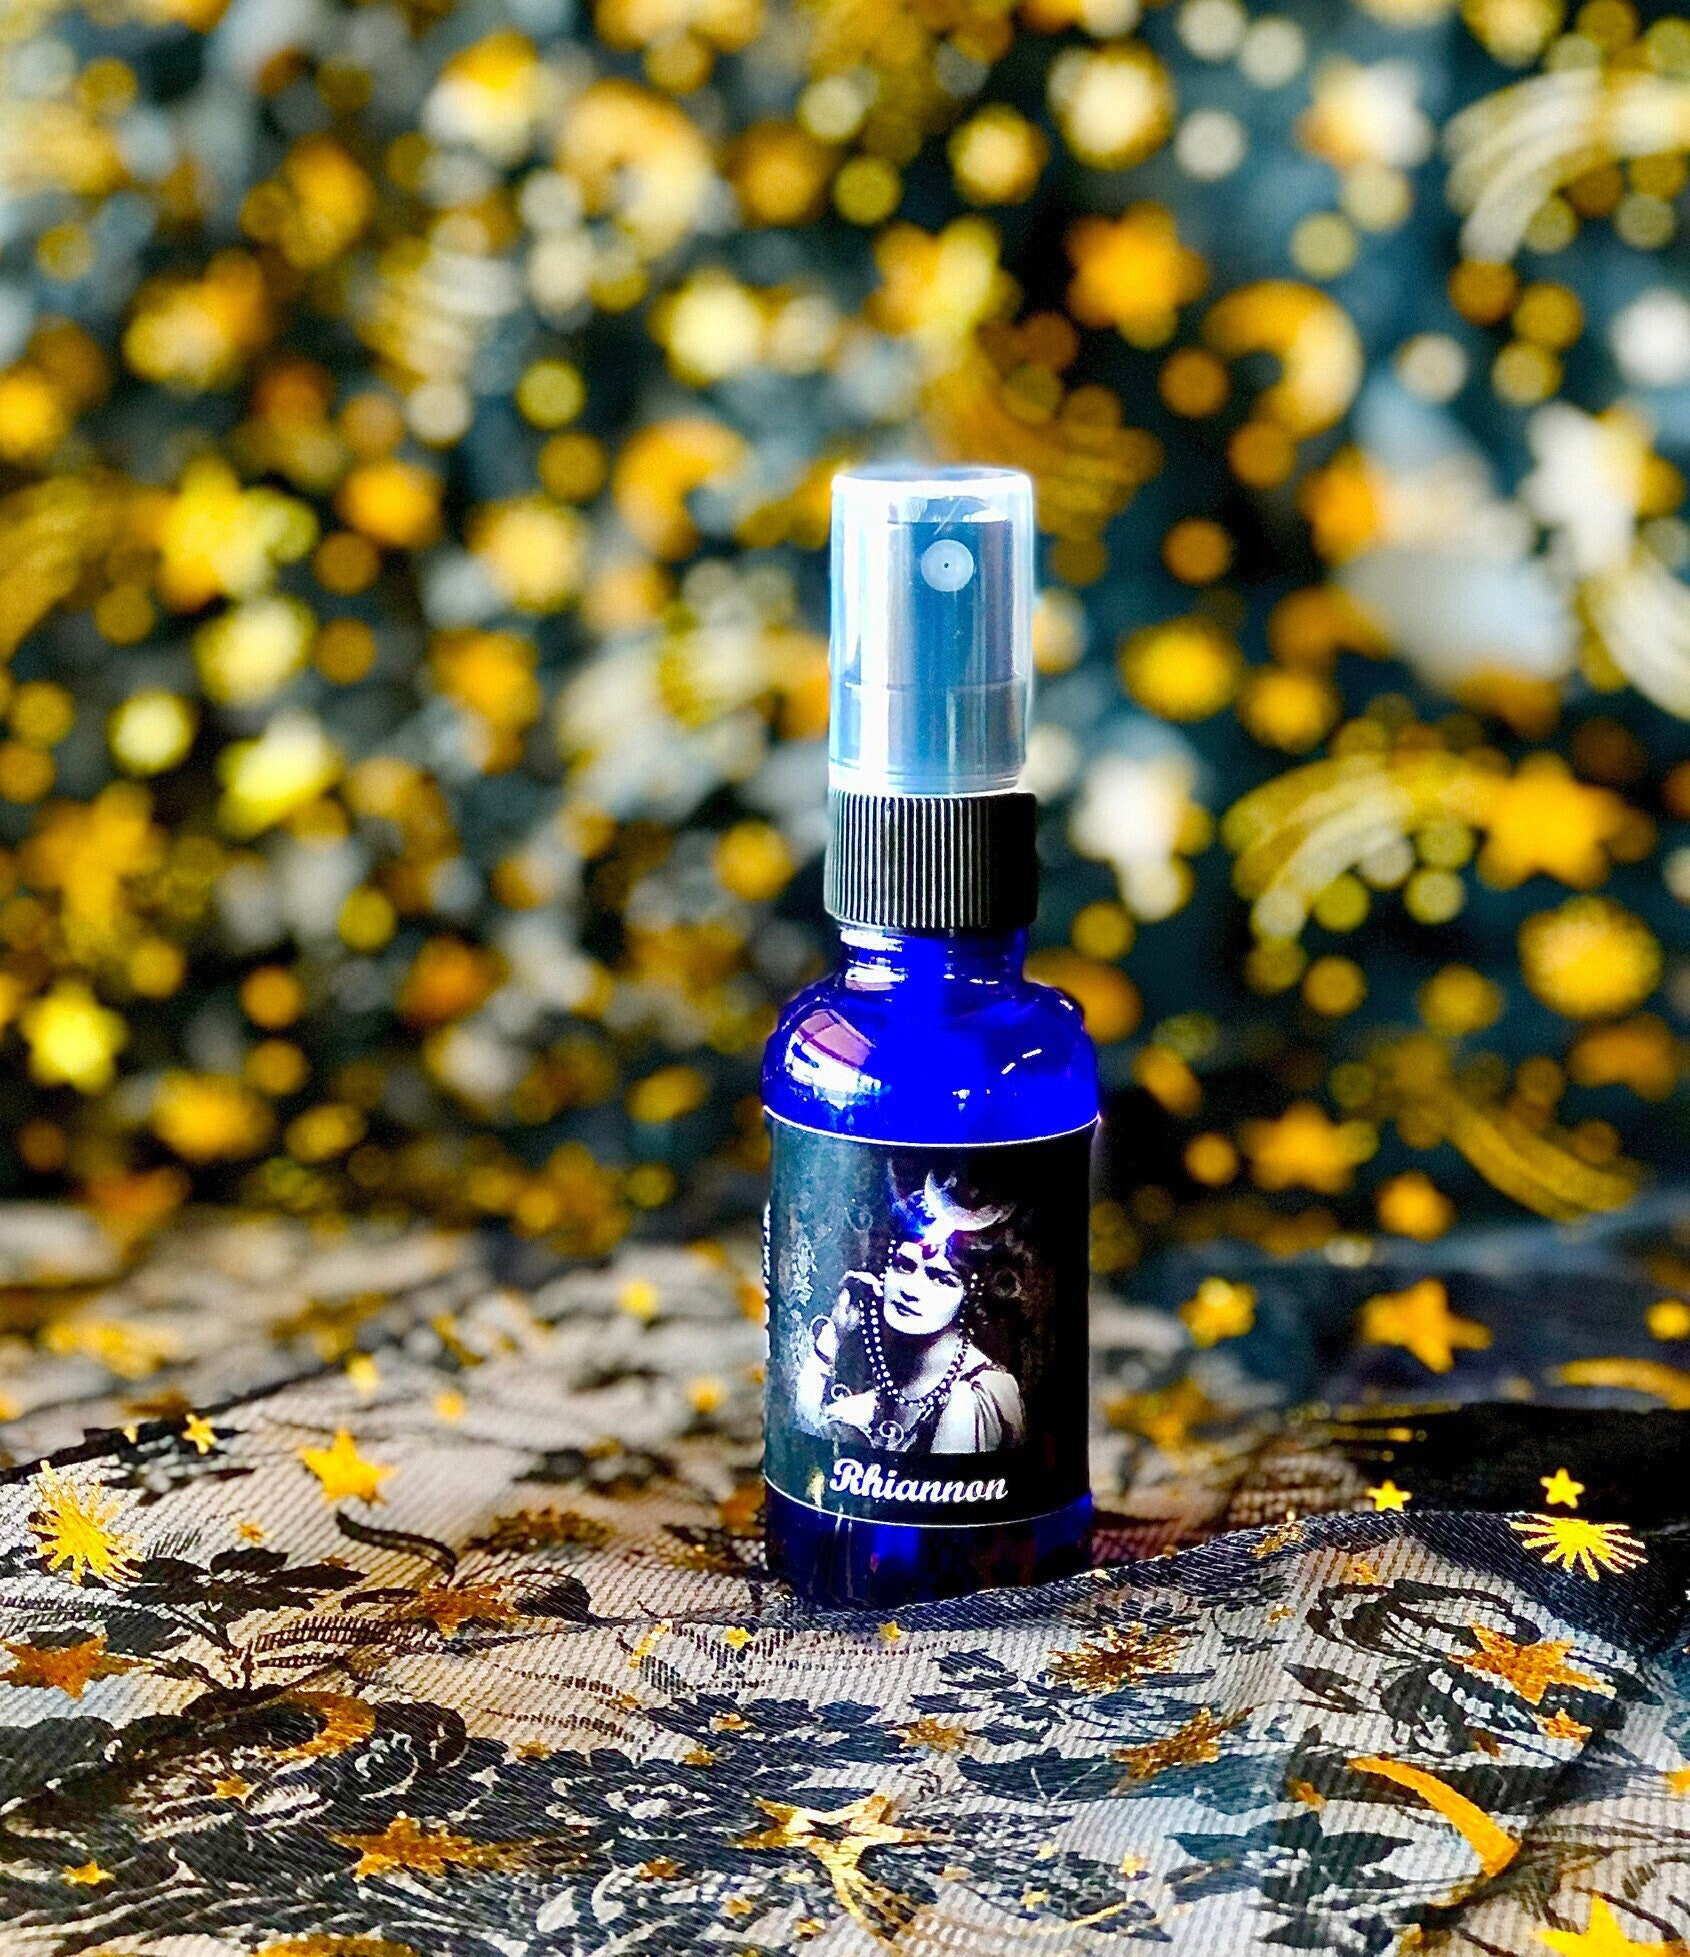 Victorian Rose Witch™ Love & Lust Rose Perfume Ritual Oil